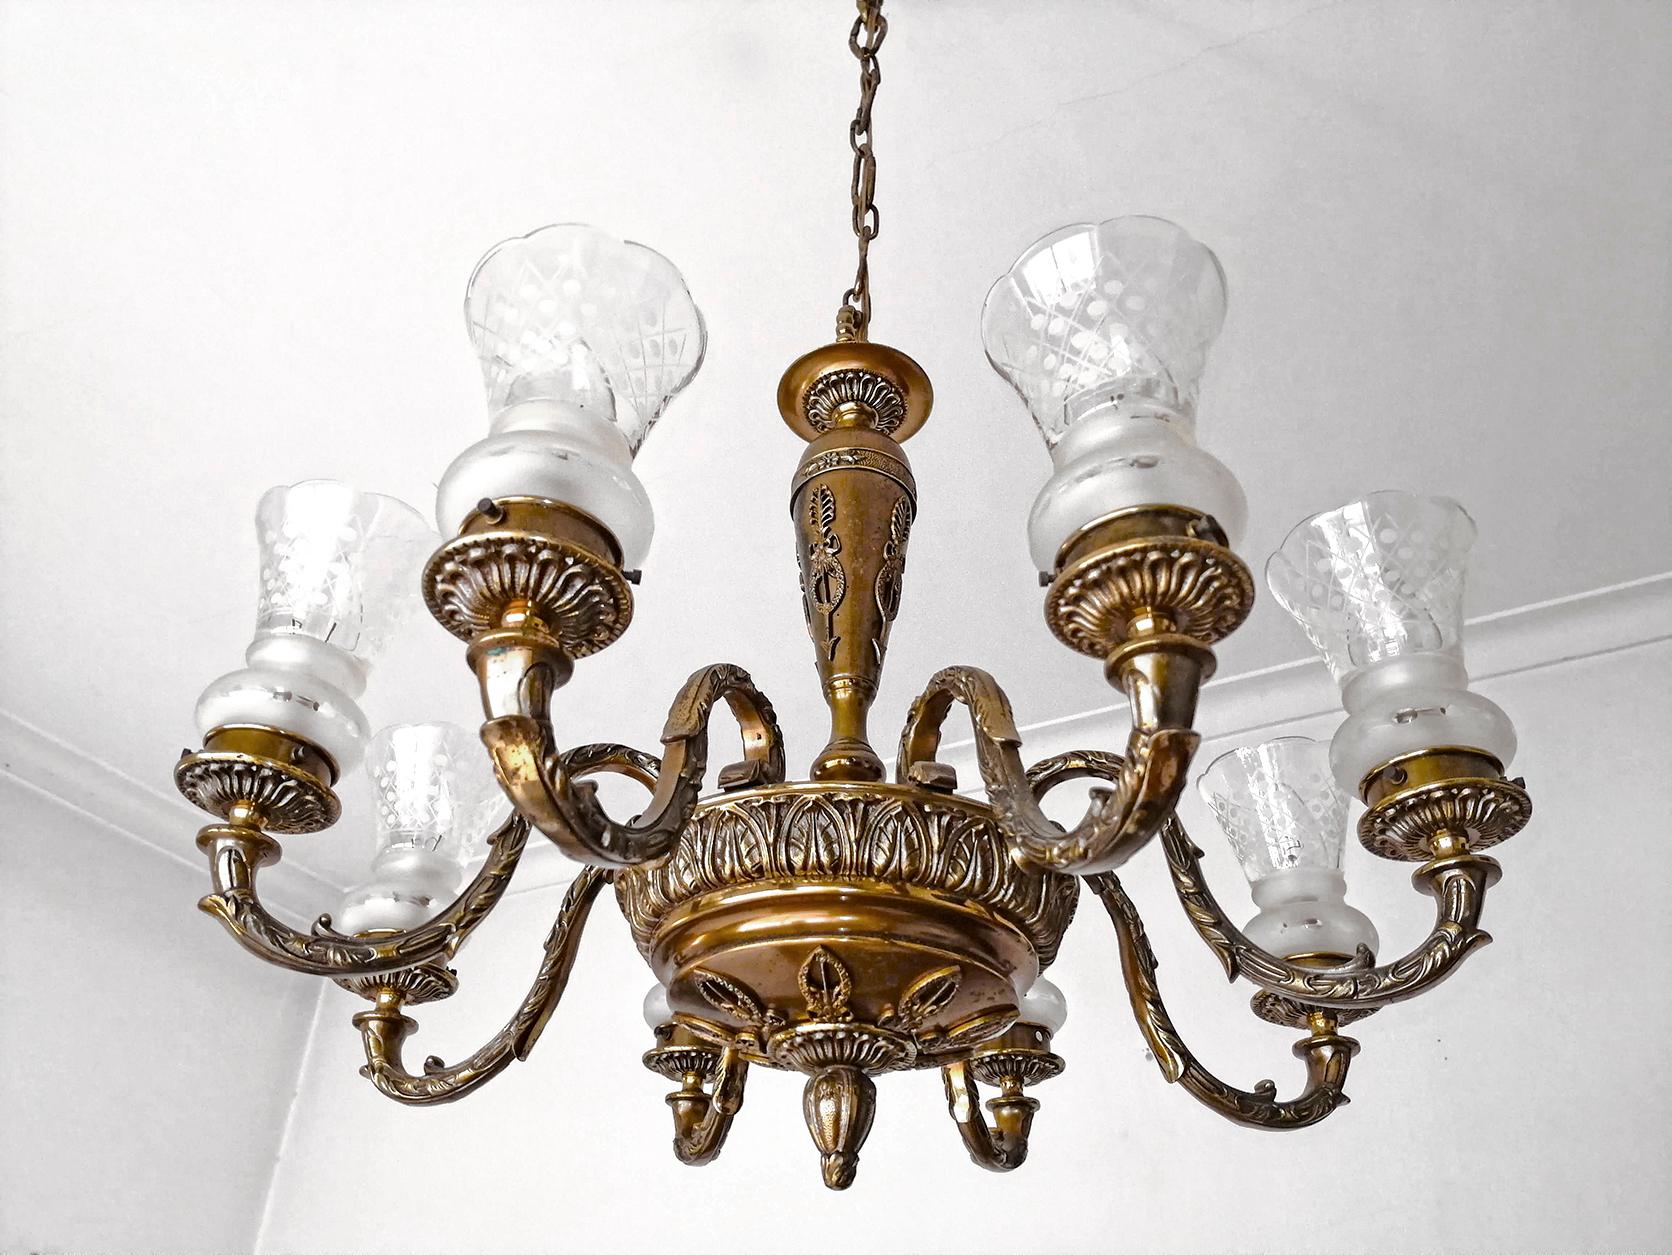 Art Deco Antique French Empire Neoclassical Gilt Bronze Chandelier, Early 20th Century For Sale